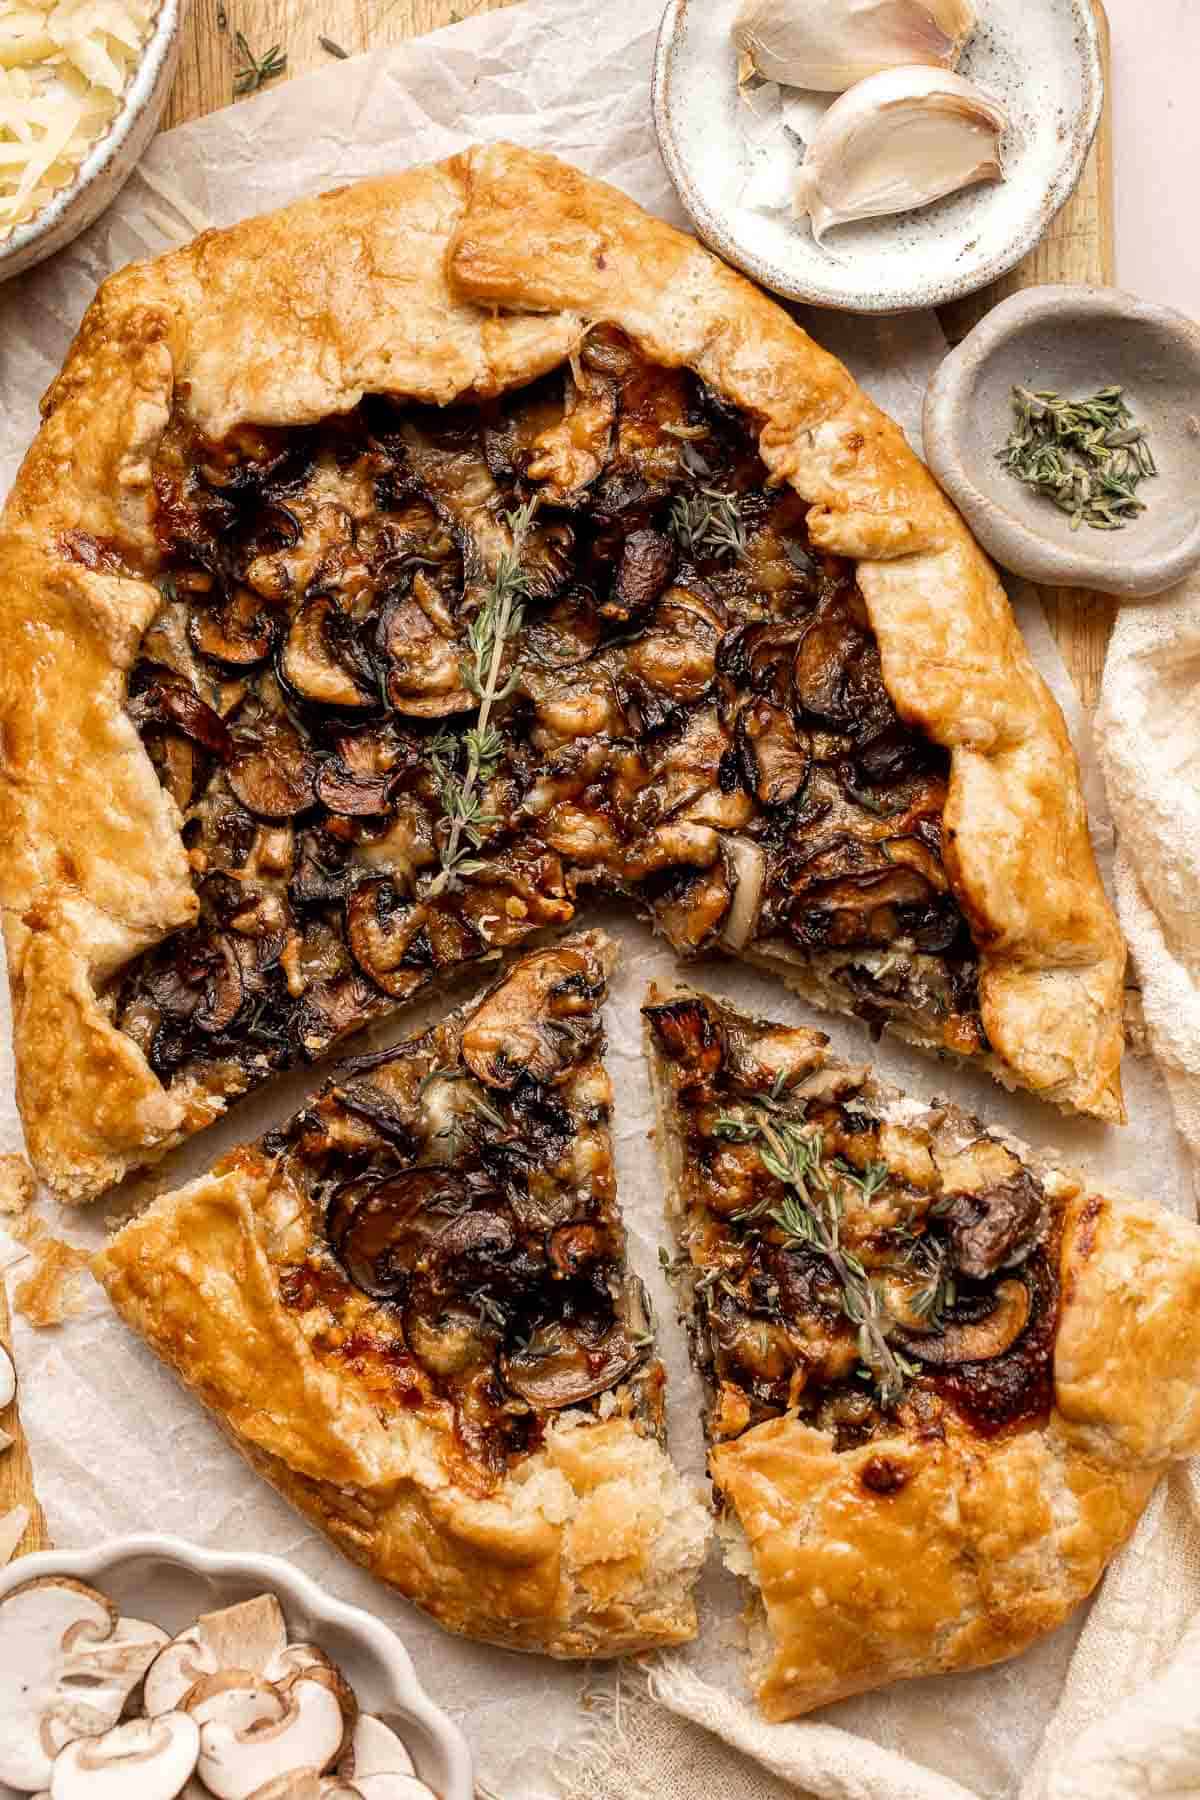 Made with homemade pie crust and an earthy, cheesy mushroom filling, this savory Mushroom Galette is an absolute delight. Serve for appetizer or side dish. | aheadofthyme.com